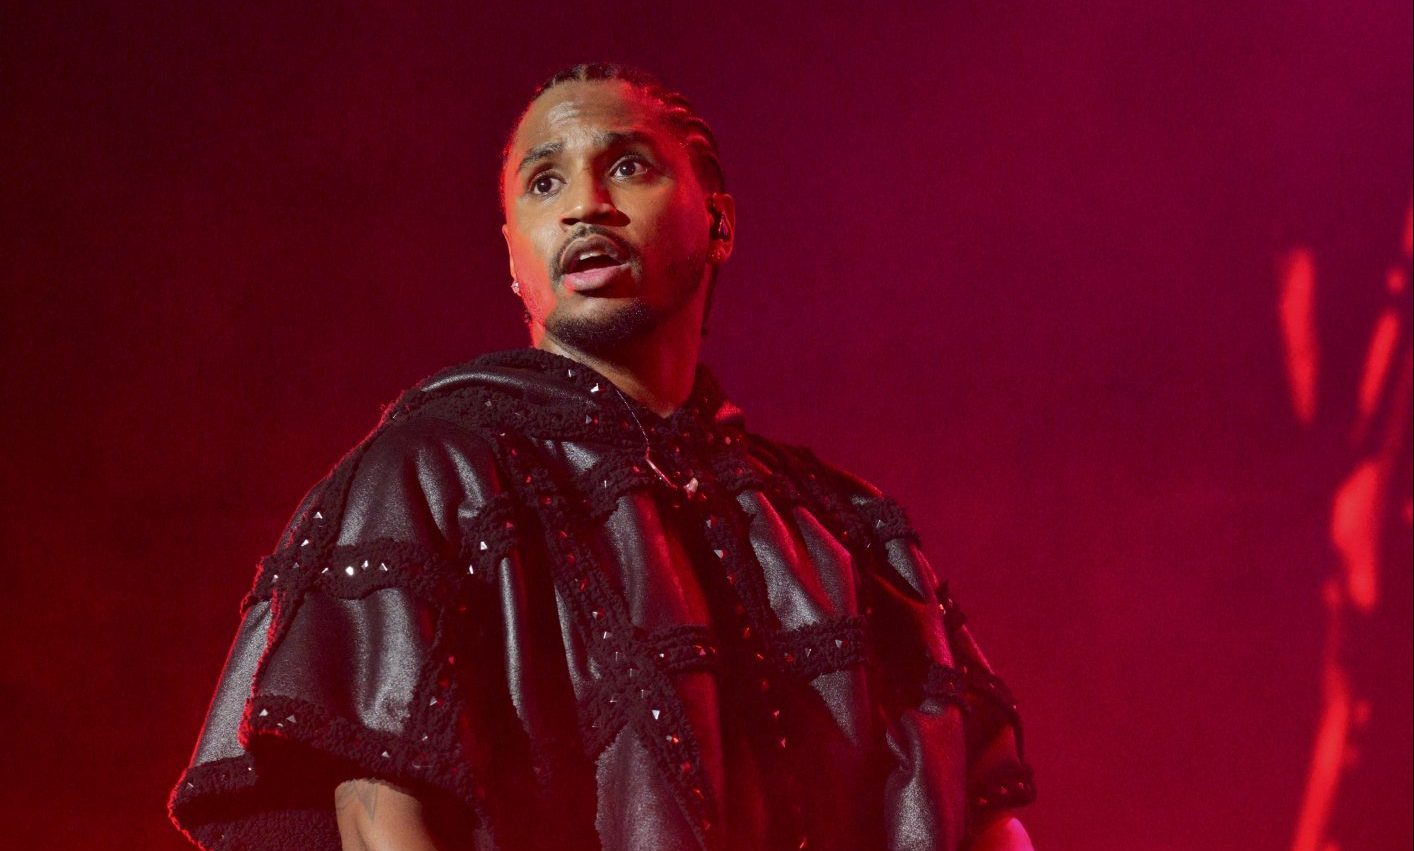 Oop! The Internet Cuts UP After Trey Songz Gets Up Close & Personal With Fans At A Baltimore Meet & Greet (Pics) thumbnail